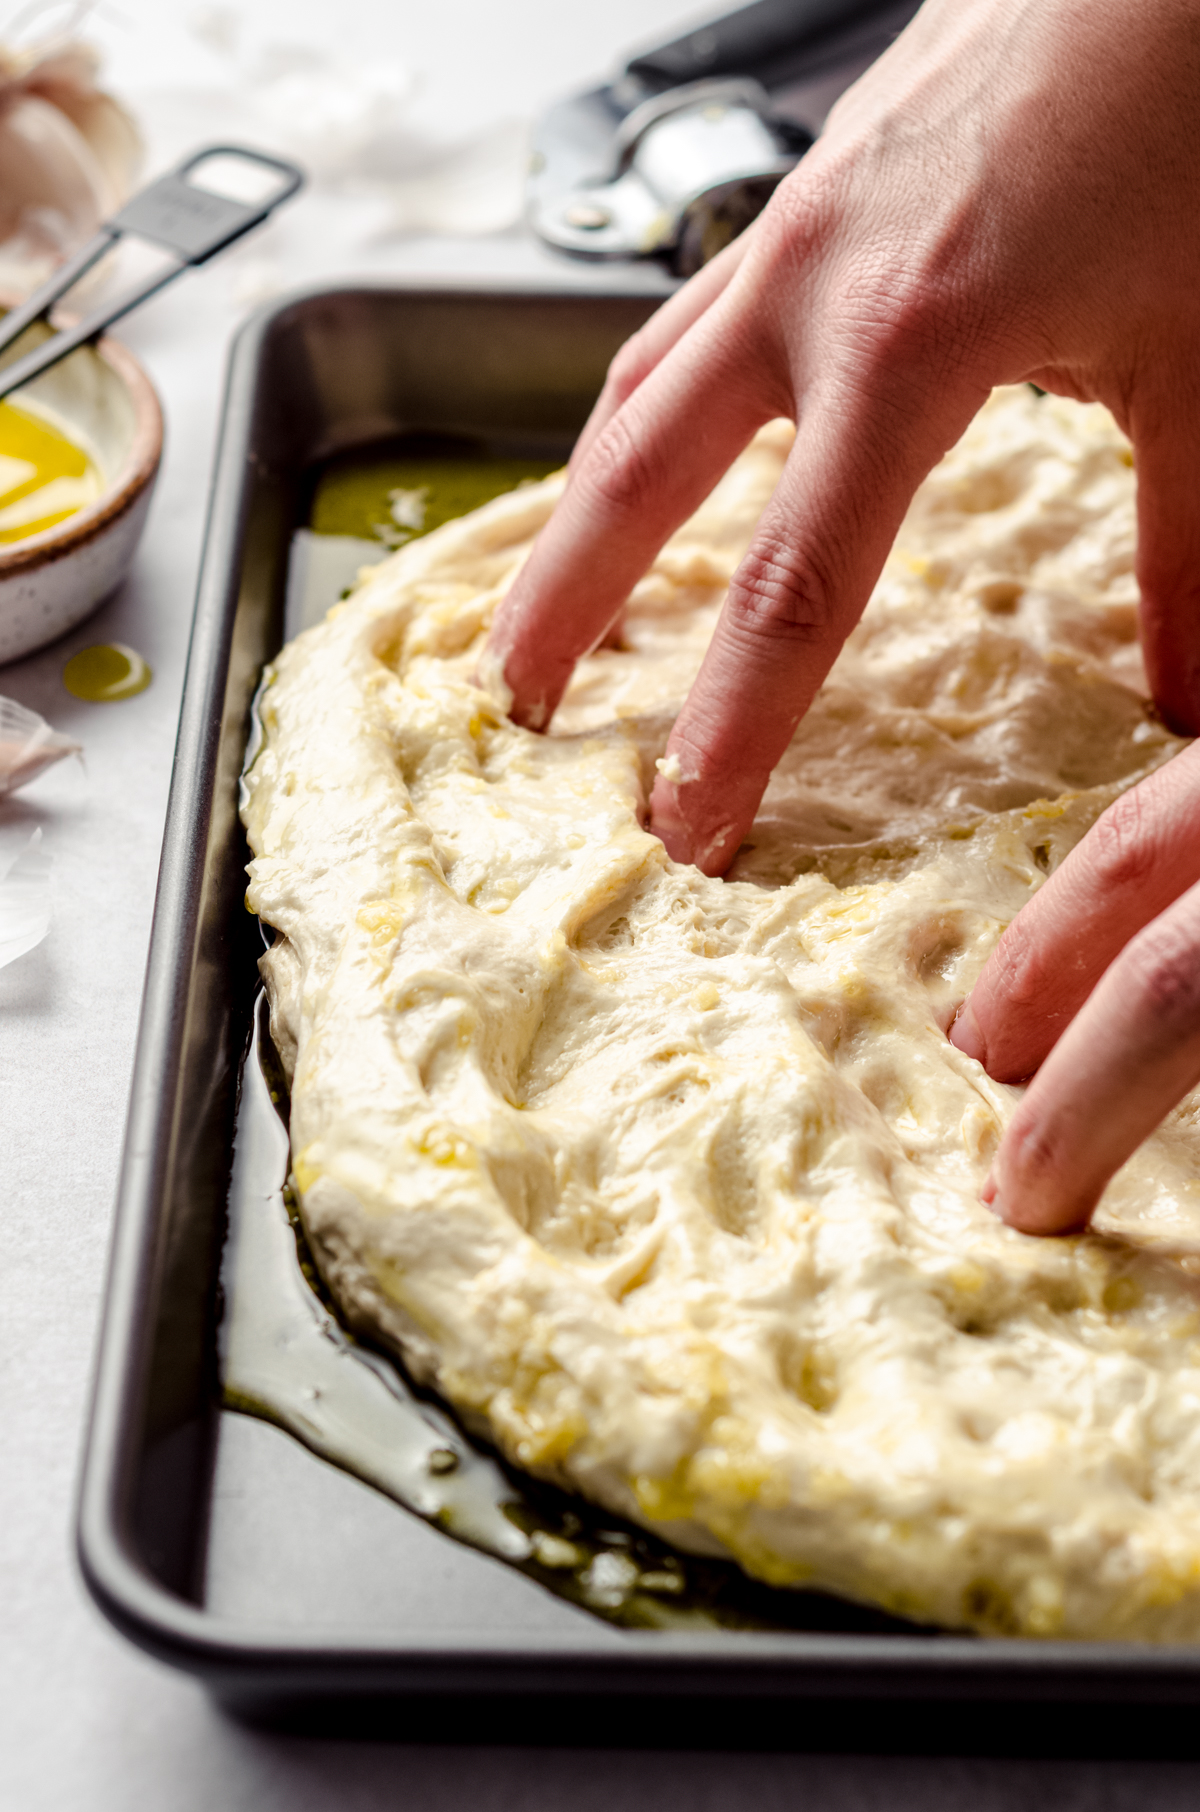 Someone is using their fingers to dimple focaccia dough in a baking dish.